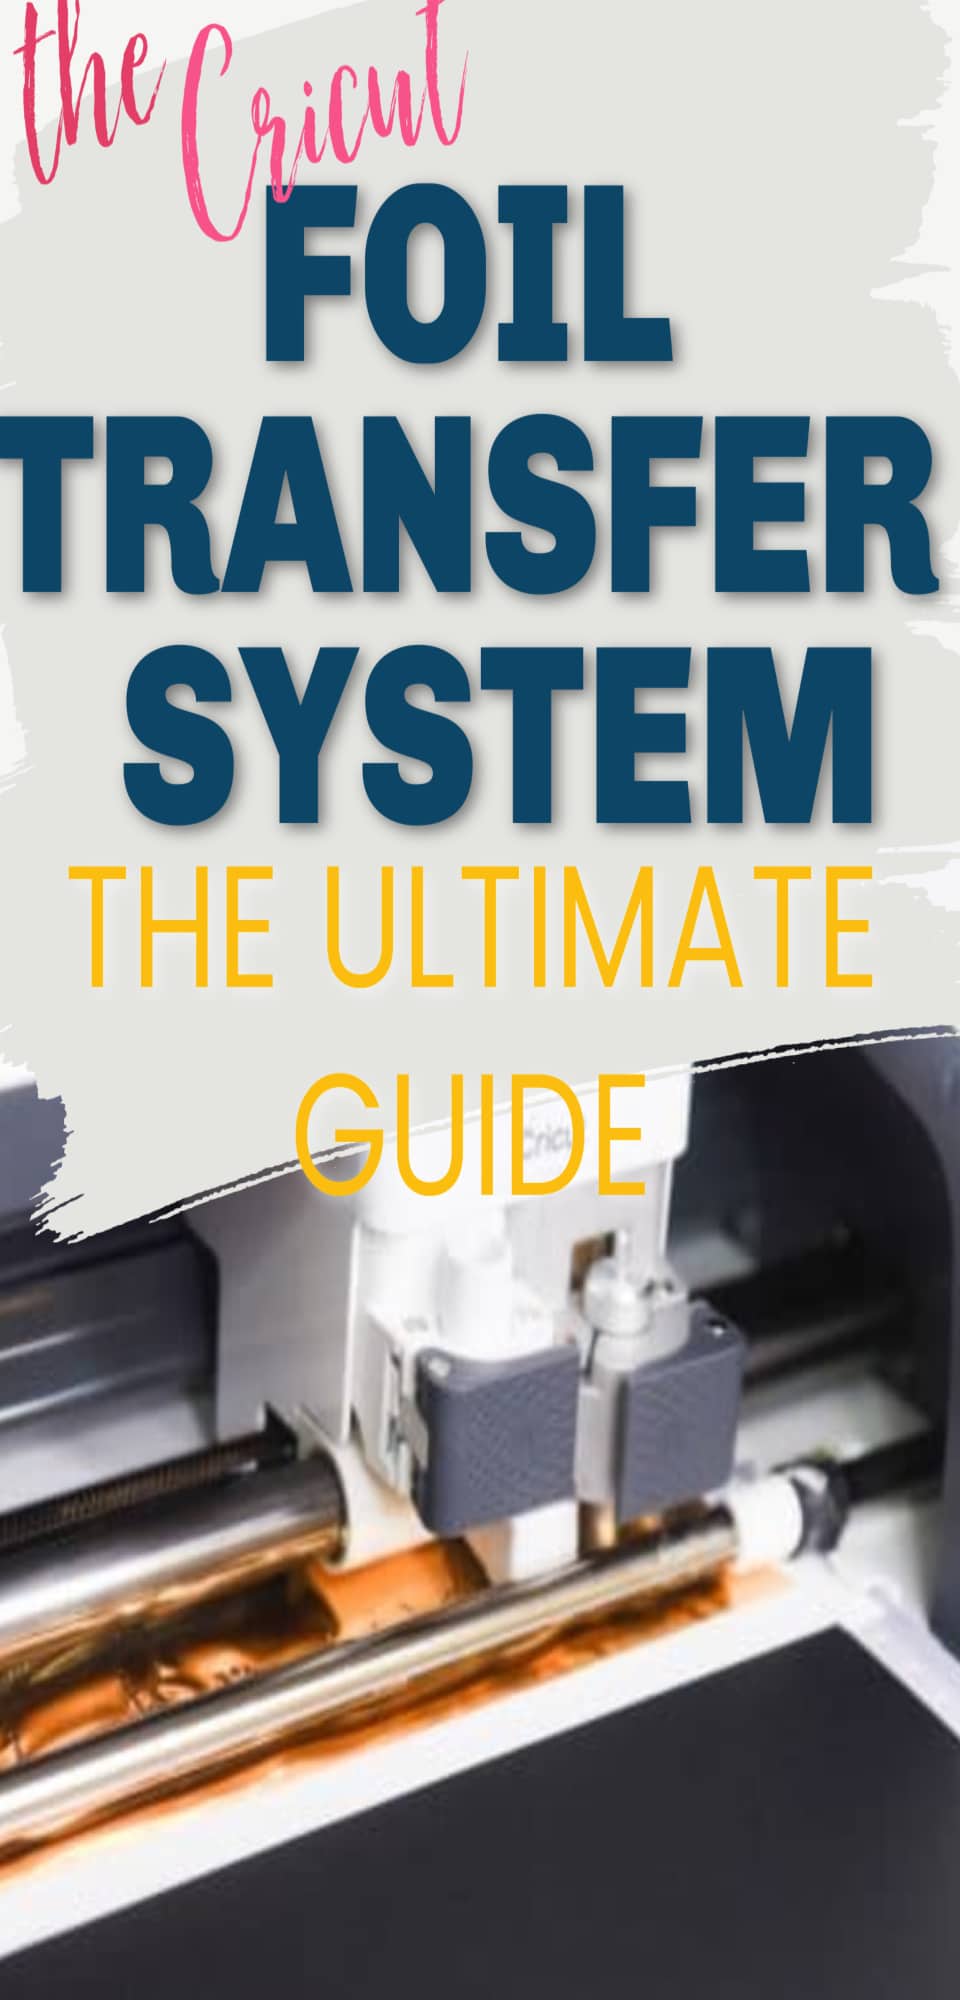 Cricut Foil Transfer Kit (How The System Works?) Extraordinary Chaos